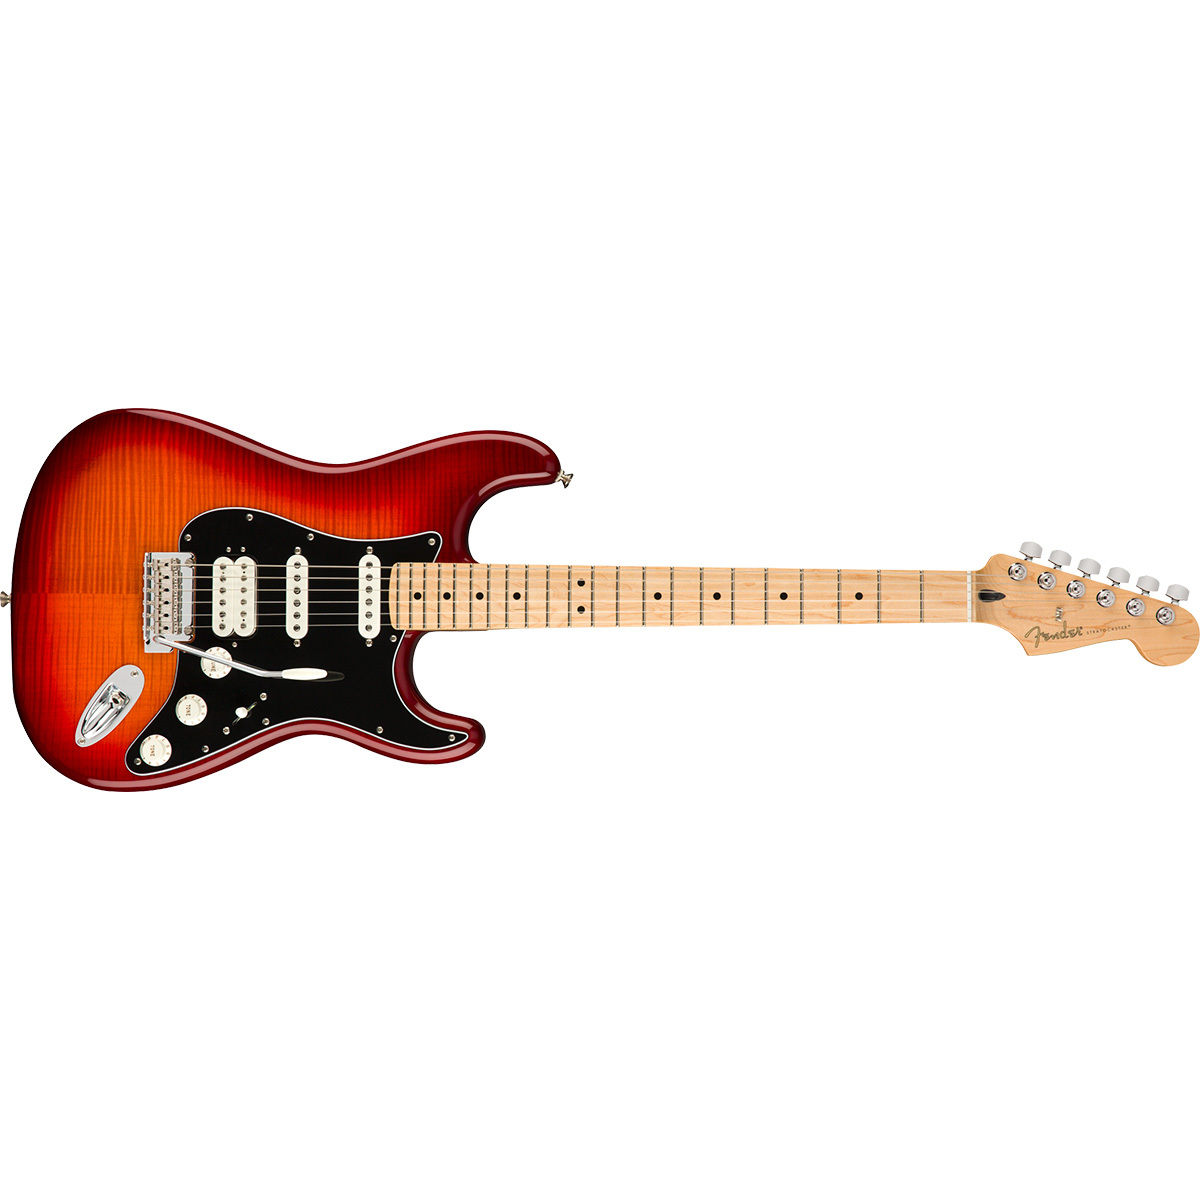 FenderPLAYER ST PTOP MN ACB/ACB